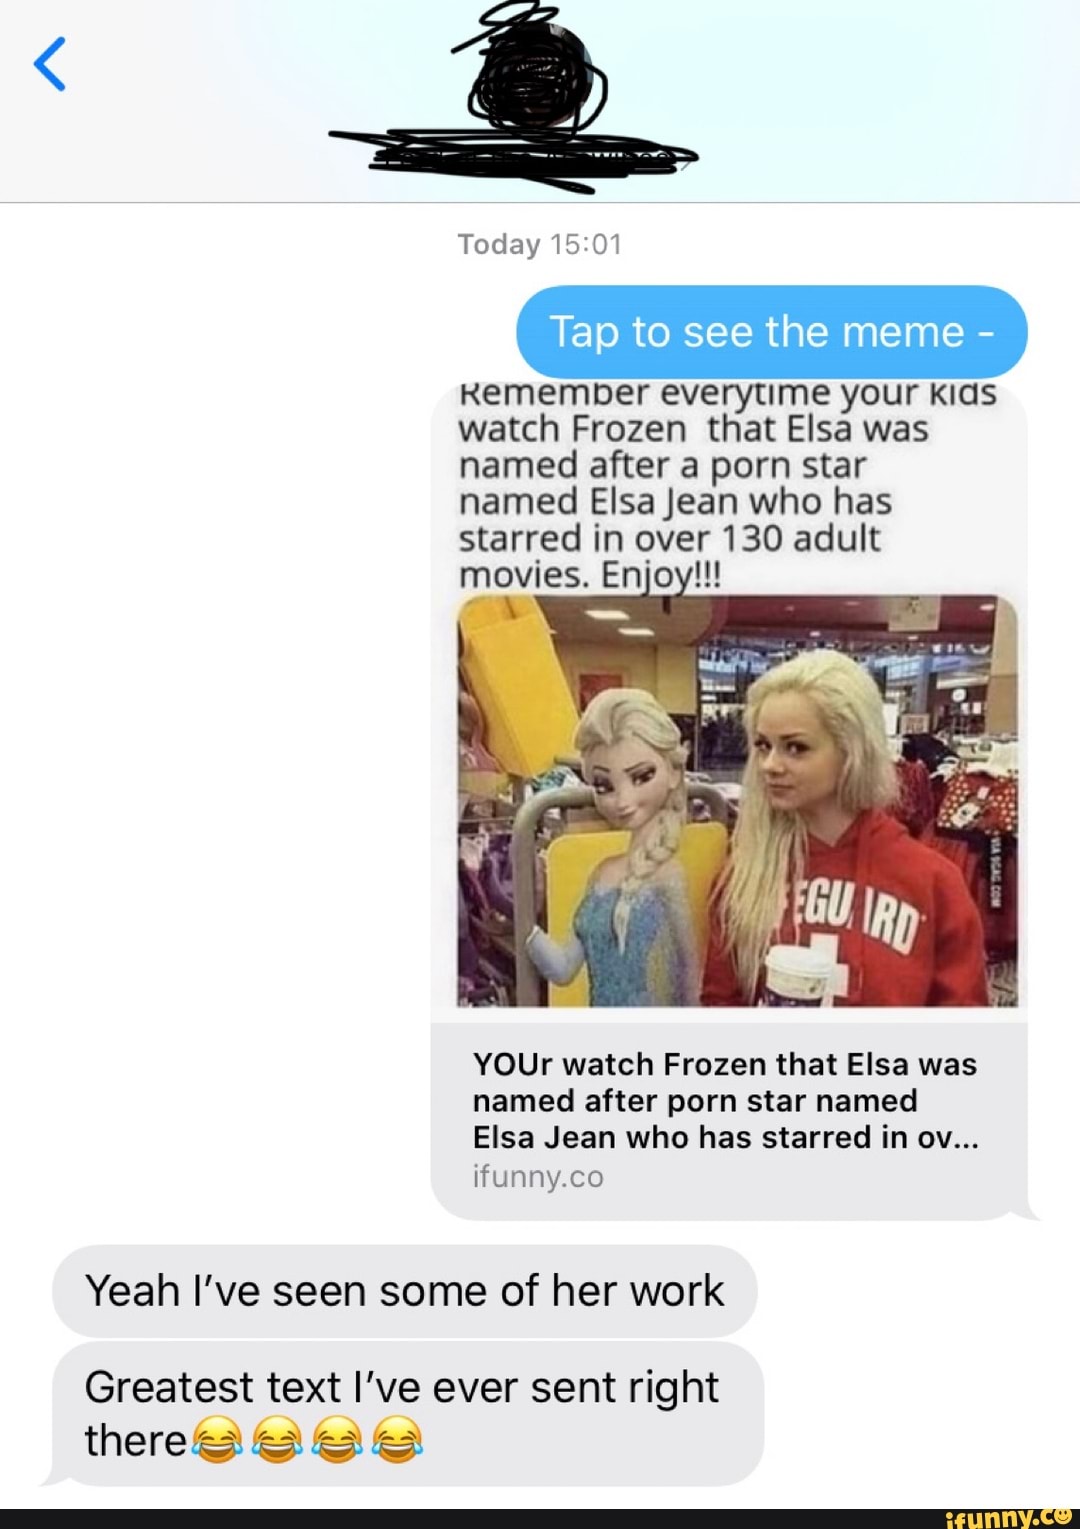 Frozen Porn Captions - Today Tap to see the meme - Kemember everytime your kids watch Frozen that  Elsa was named